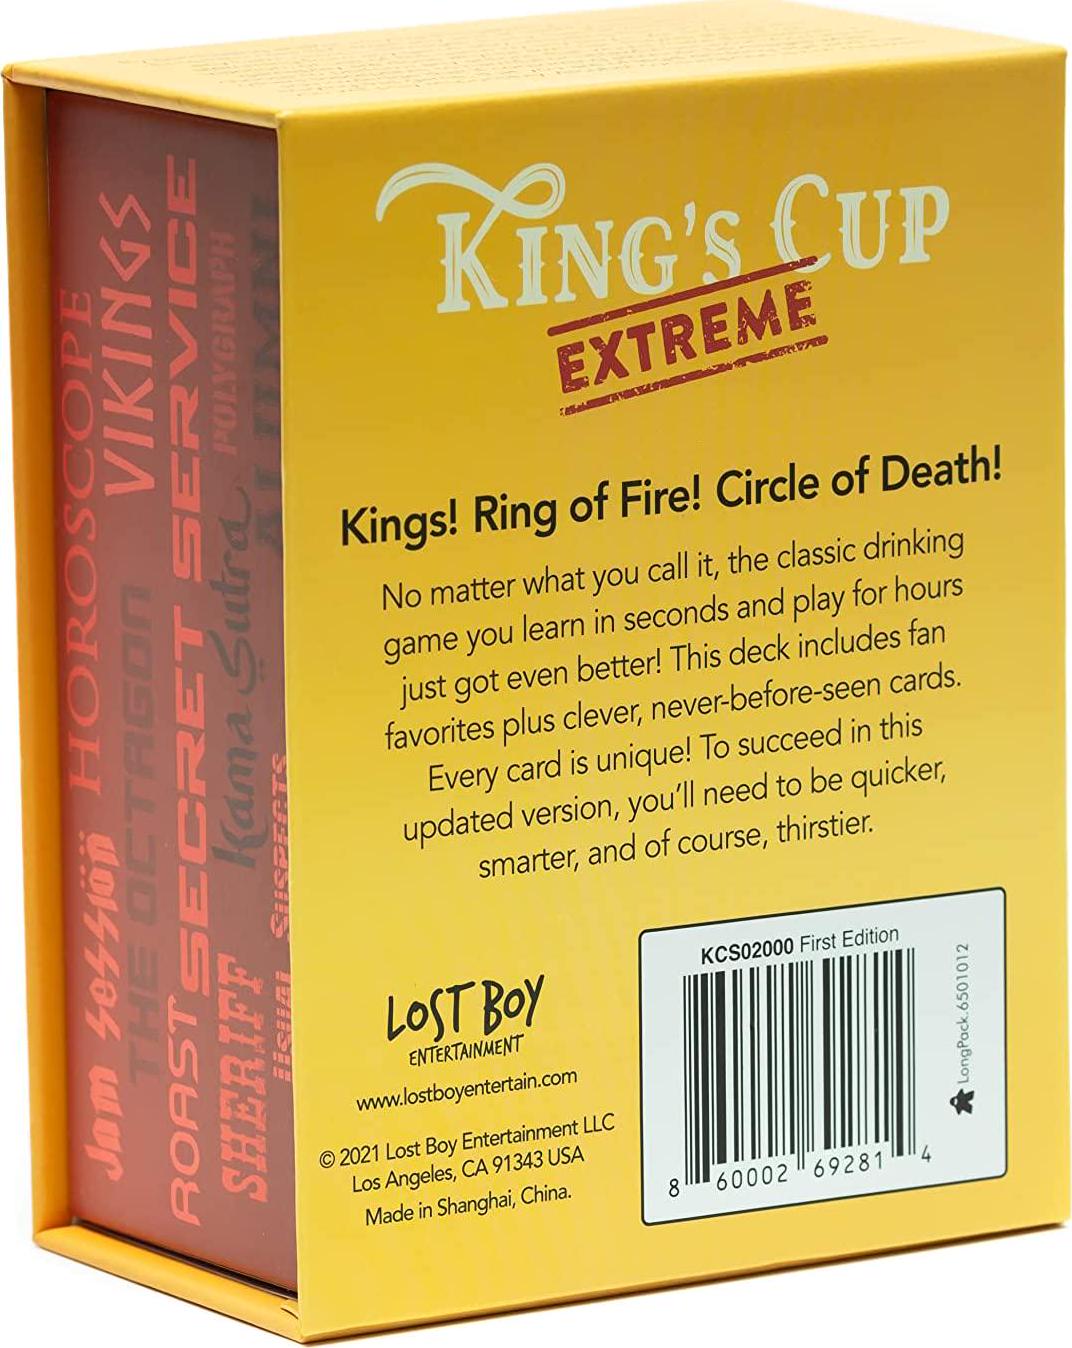 Lost Boy Entertainment, King s Cup Extreme - Drinking Games - Card Games for Adults, Couples, Bachelorettes - Party Games - Game Night - Date Night - Laugh and Drink - Get Buzzed Have Fun